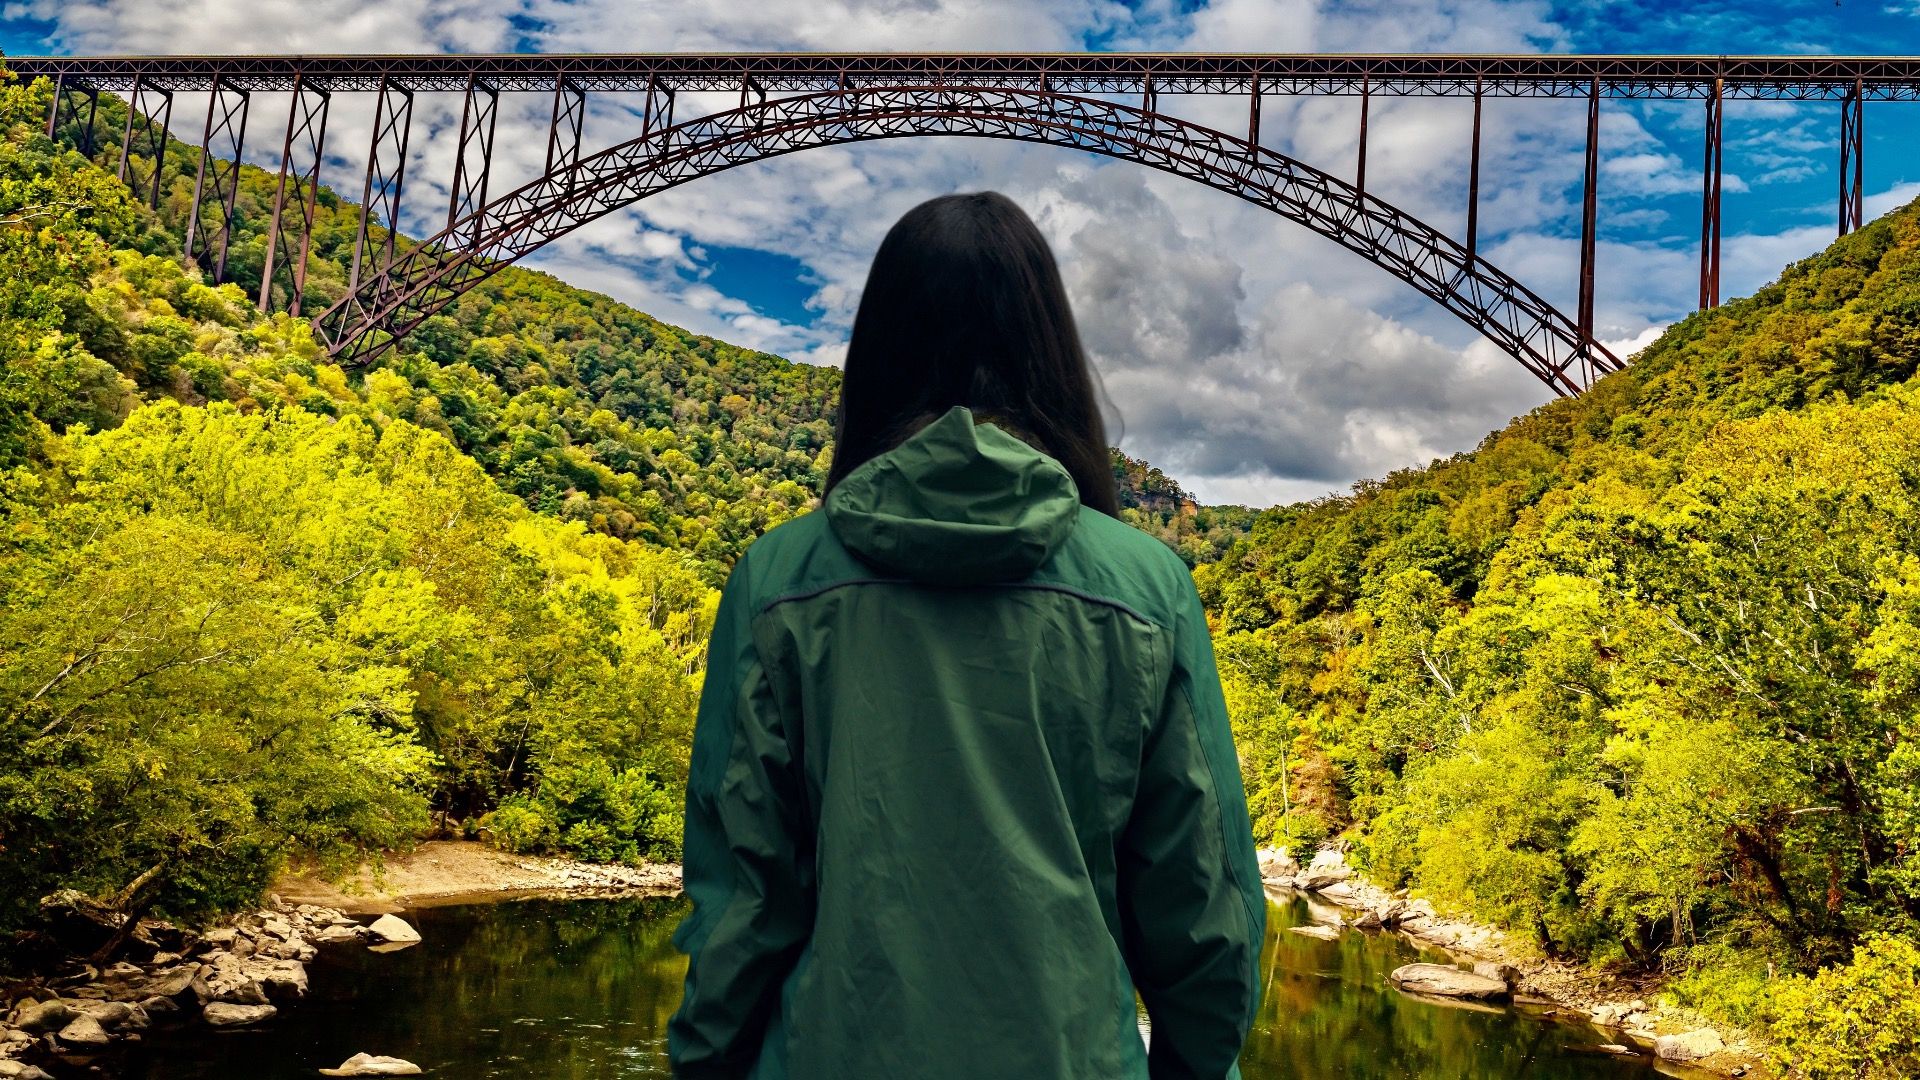 The New River Gorge Bridge at New River Gorge National Park and Preserve